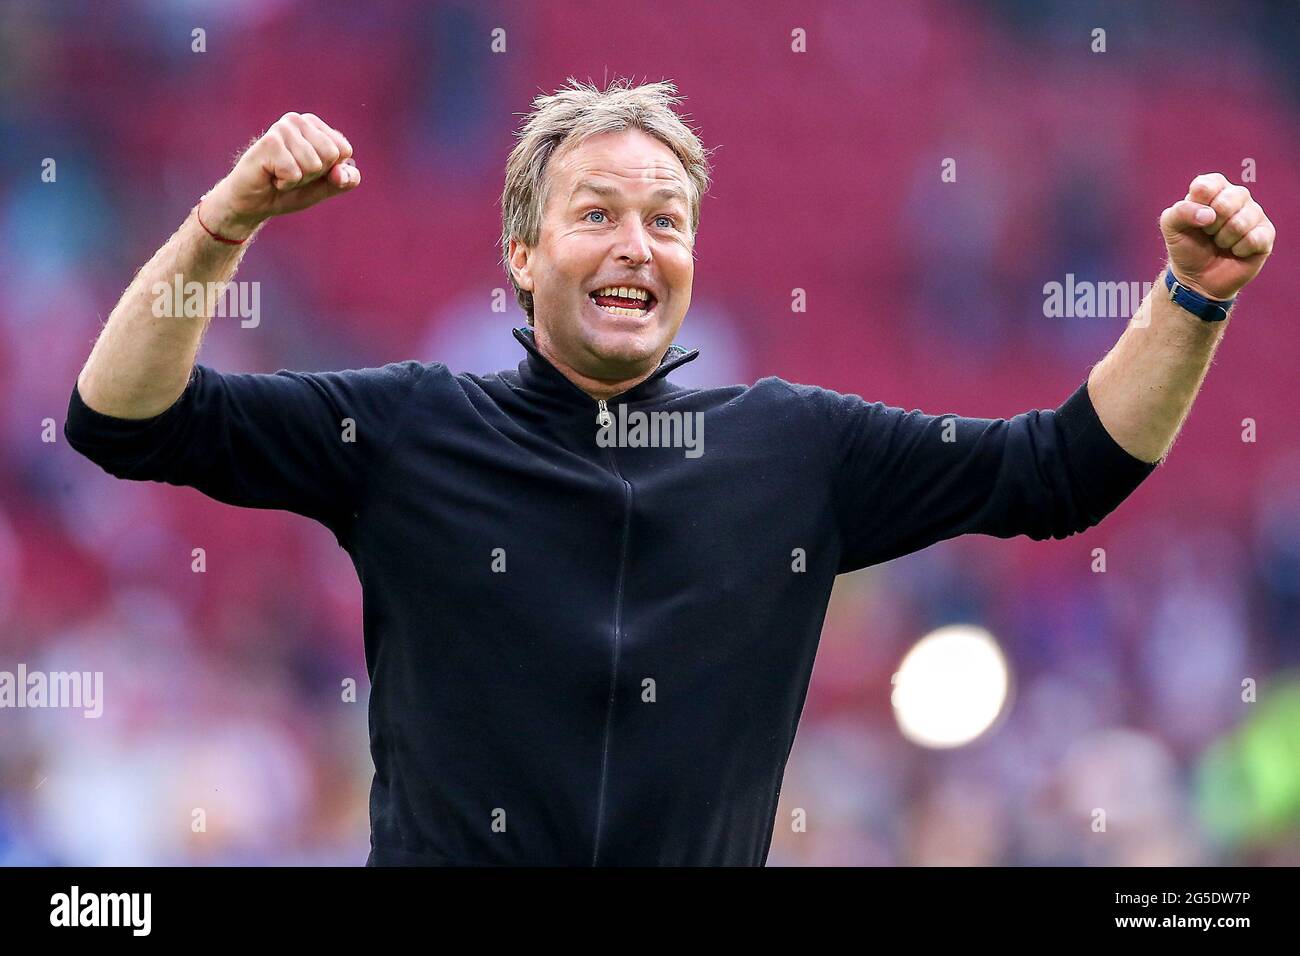 Denmark manager Kasper Hjulmand celebrates victory after the final whistle during the UEFA Euro 2020 round of 16 match held at the Johan Cruijff ArenA in Amsterdam, Netherlands. Picture date: Saturday June 26, 2021. Stock Photo